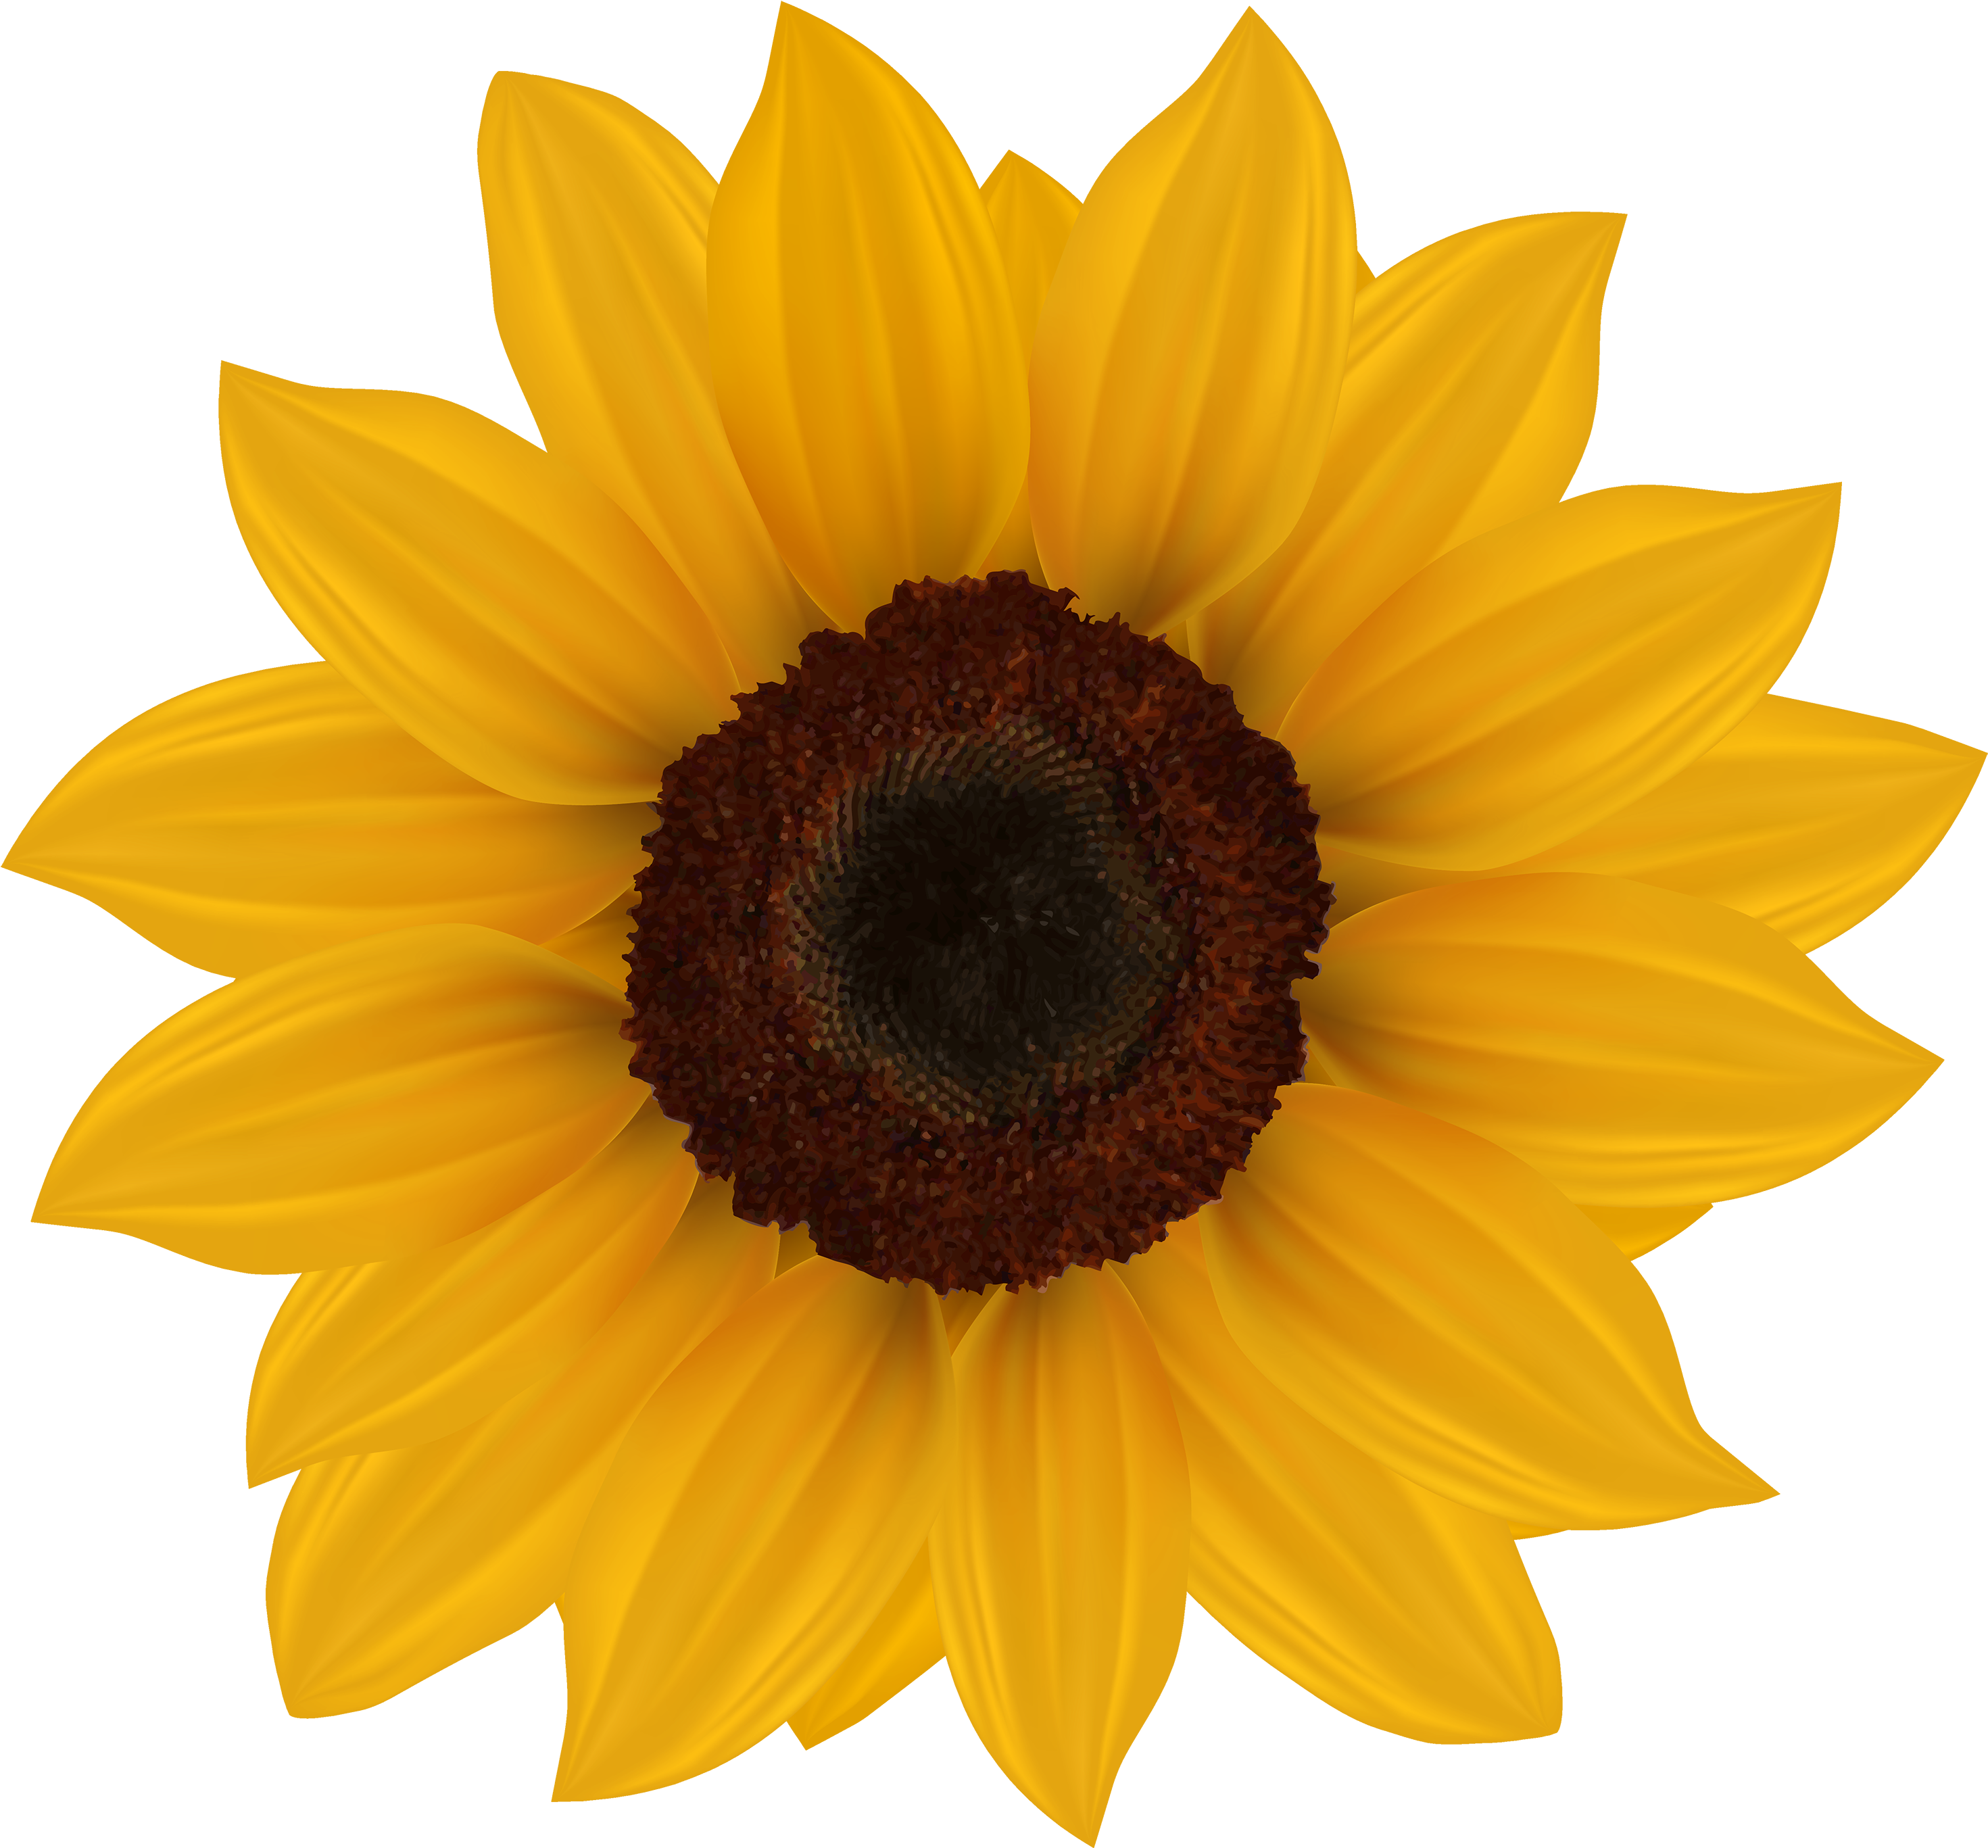 Sunflower Png Clipart Image - Sunflowers On Transparent Background (3000x2789)